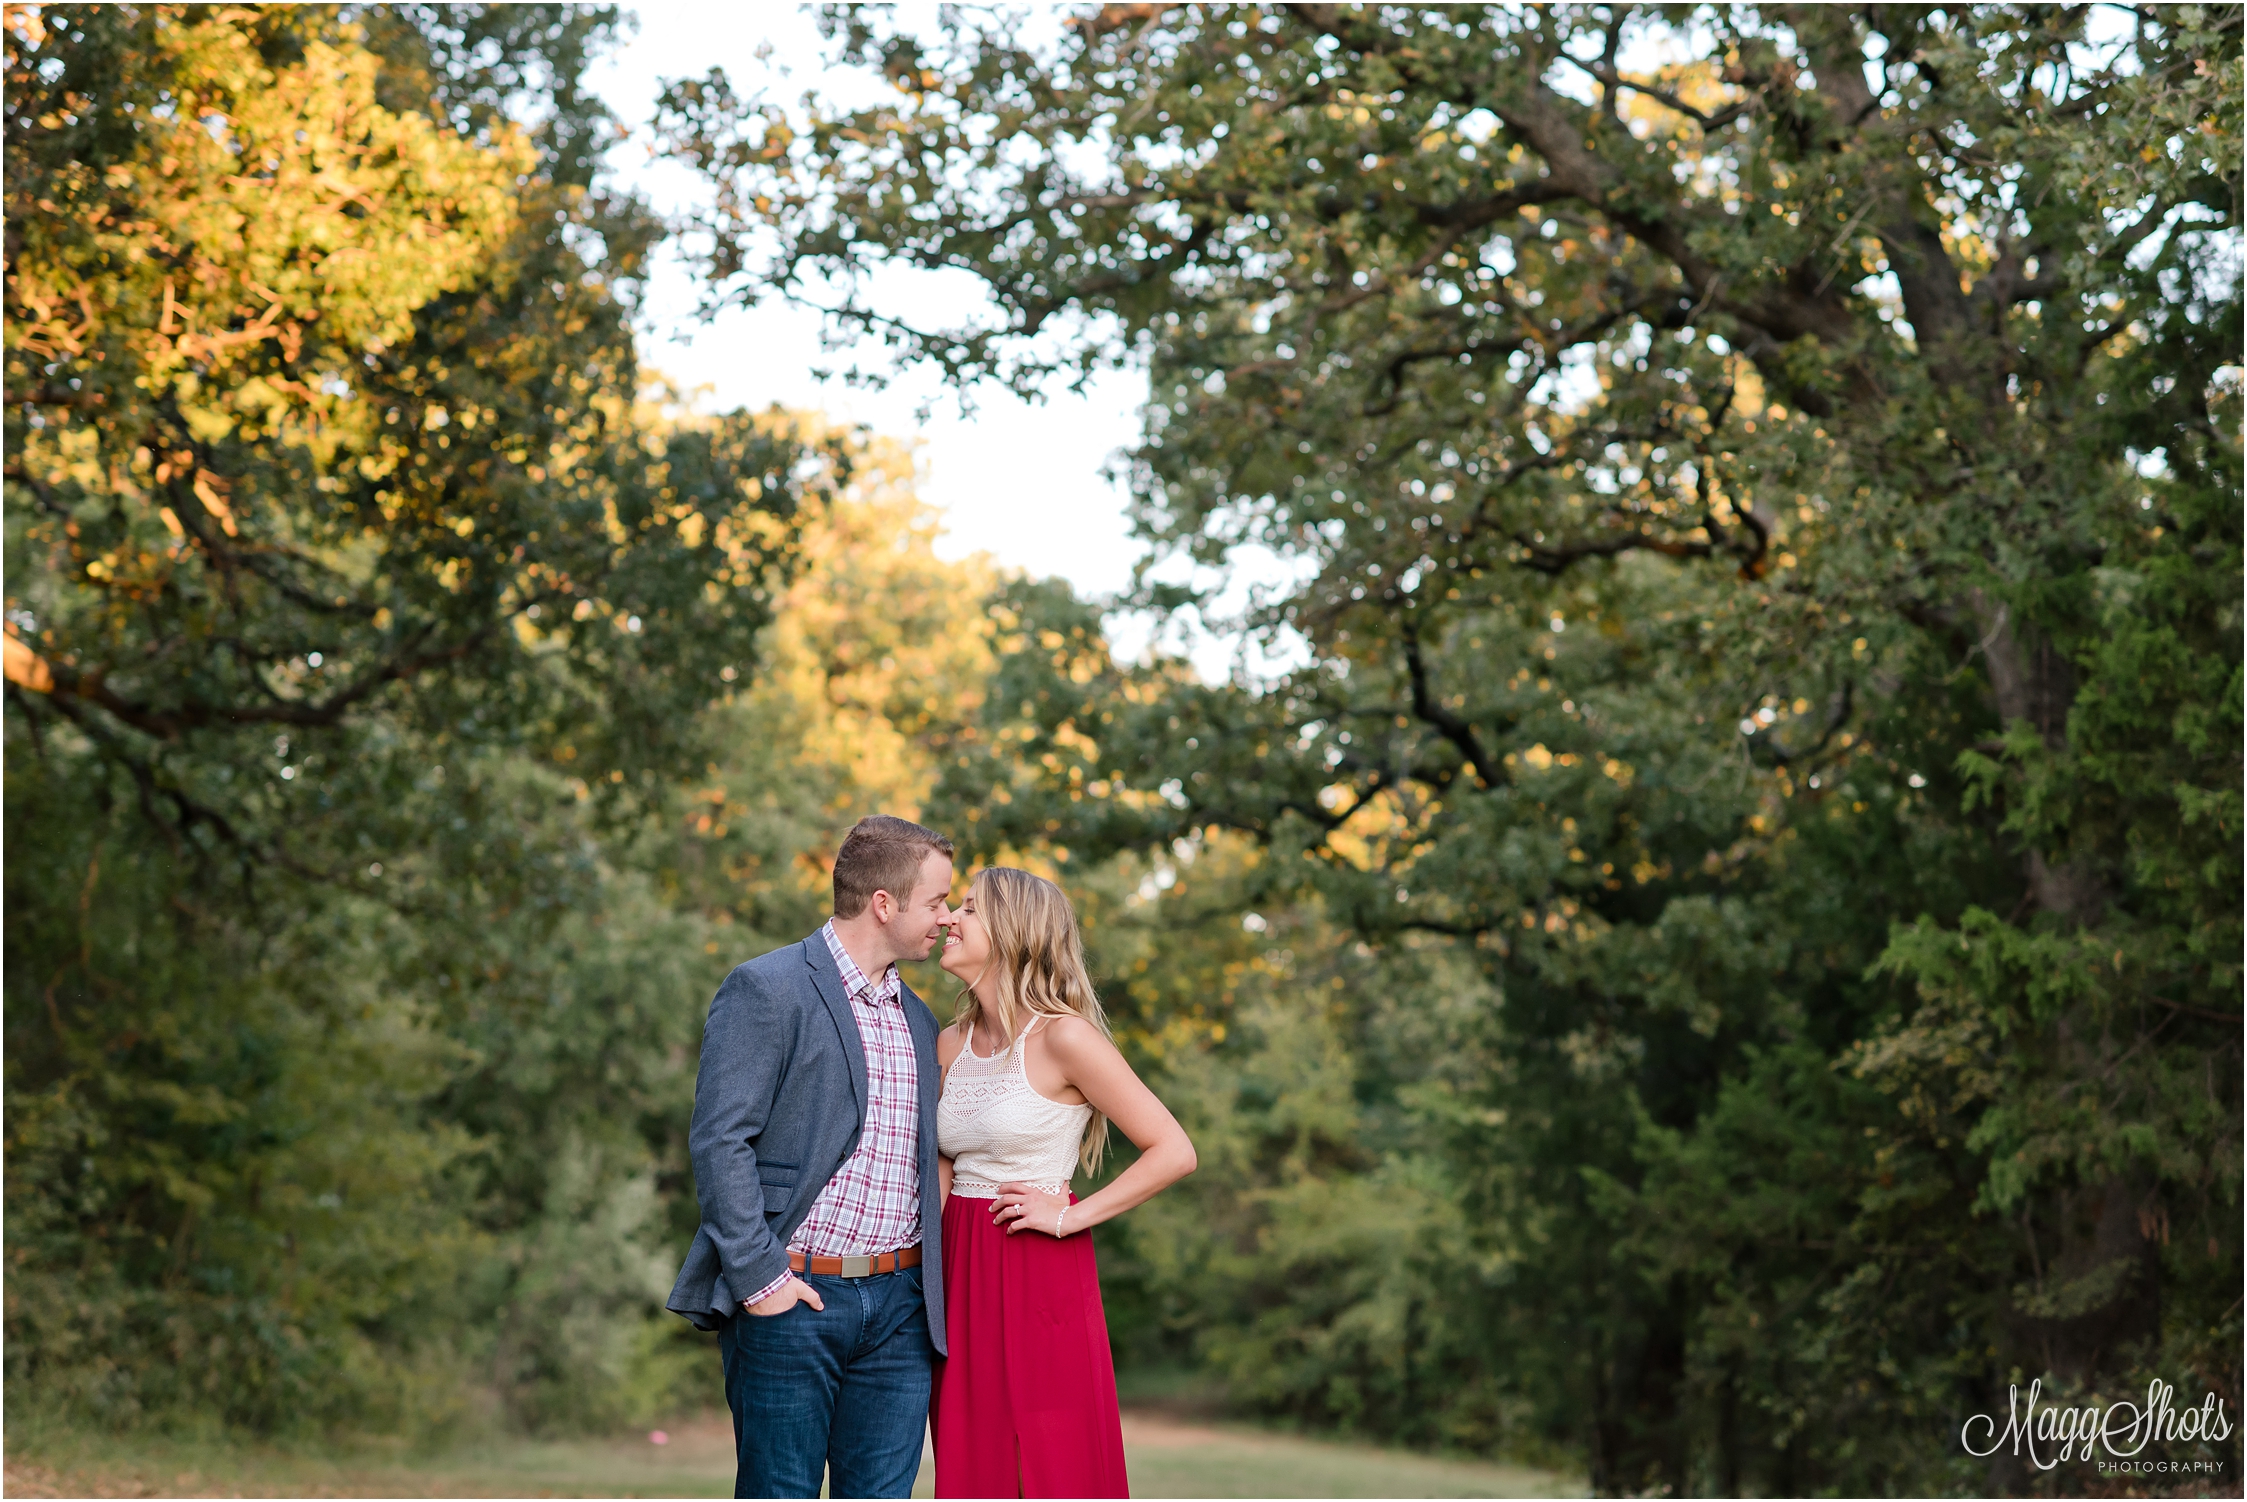 Flower Mound, Taylor and Tant, Love Engagement Session, Engagement, Park, Wedding Photographer, Professional Photographer, DFW Wedding Photographer, MaggShots, MaggShots Photography, Destination Wedding Photographer, Destination Photographer